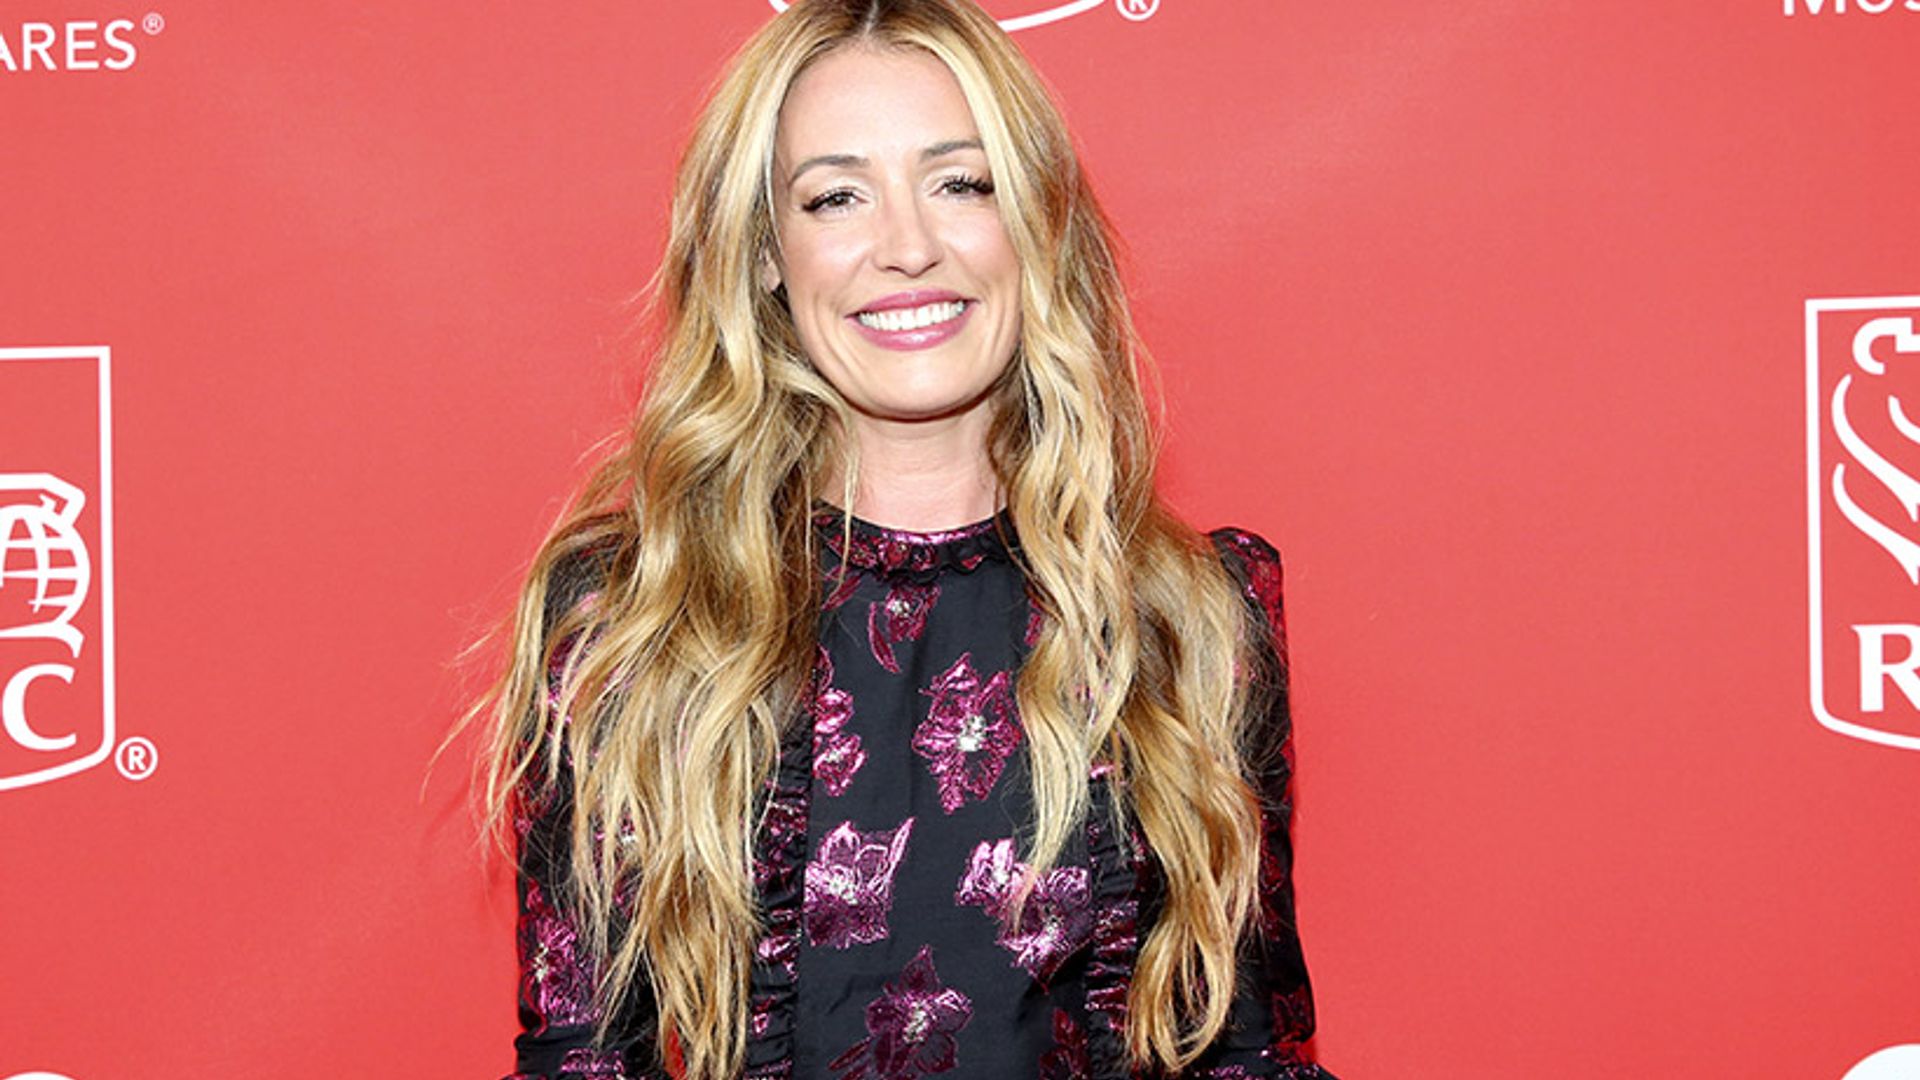 Cat Deeley introduces her glam squad in behind-the-scenes photo